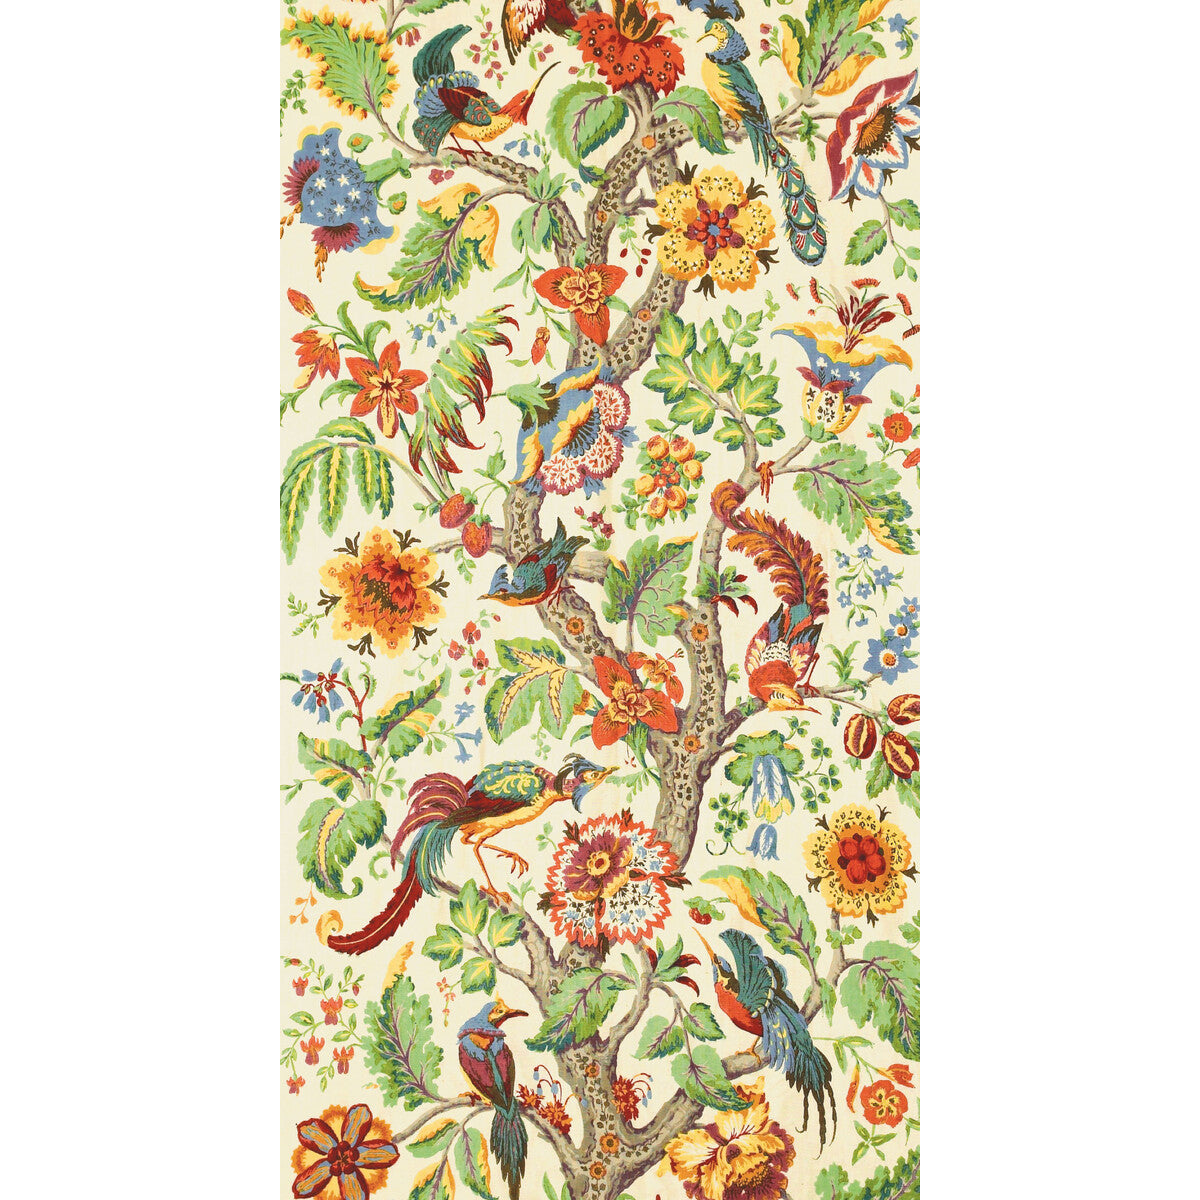 Tree Of Life fabric in multi color - pattern 667069.LJ.0 - by Lee Jofa